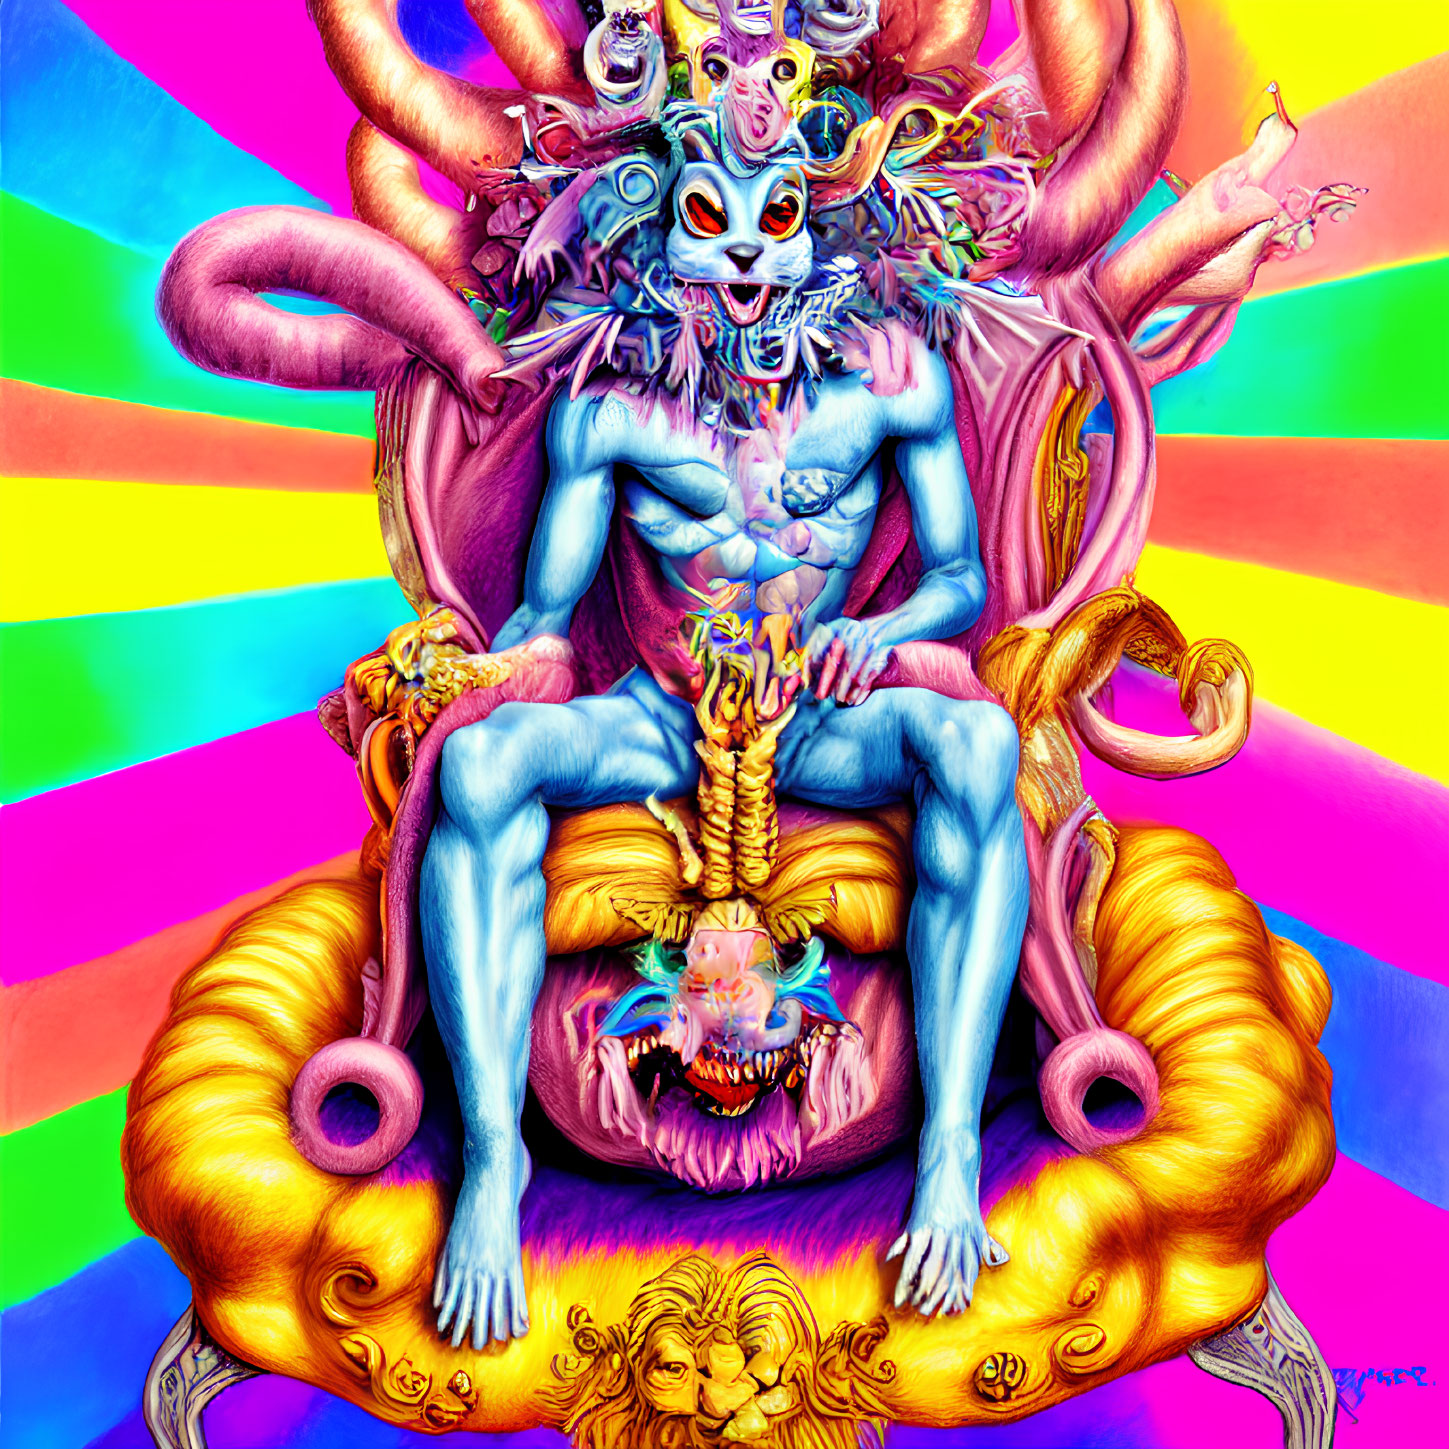 Colorful Psychedelic Illustration: Mythical Creature on Golden Throne